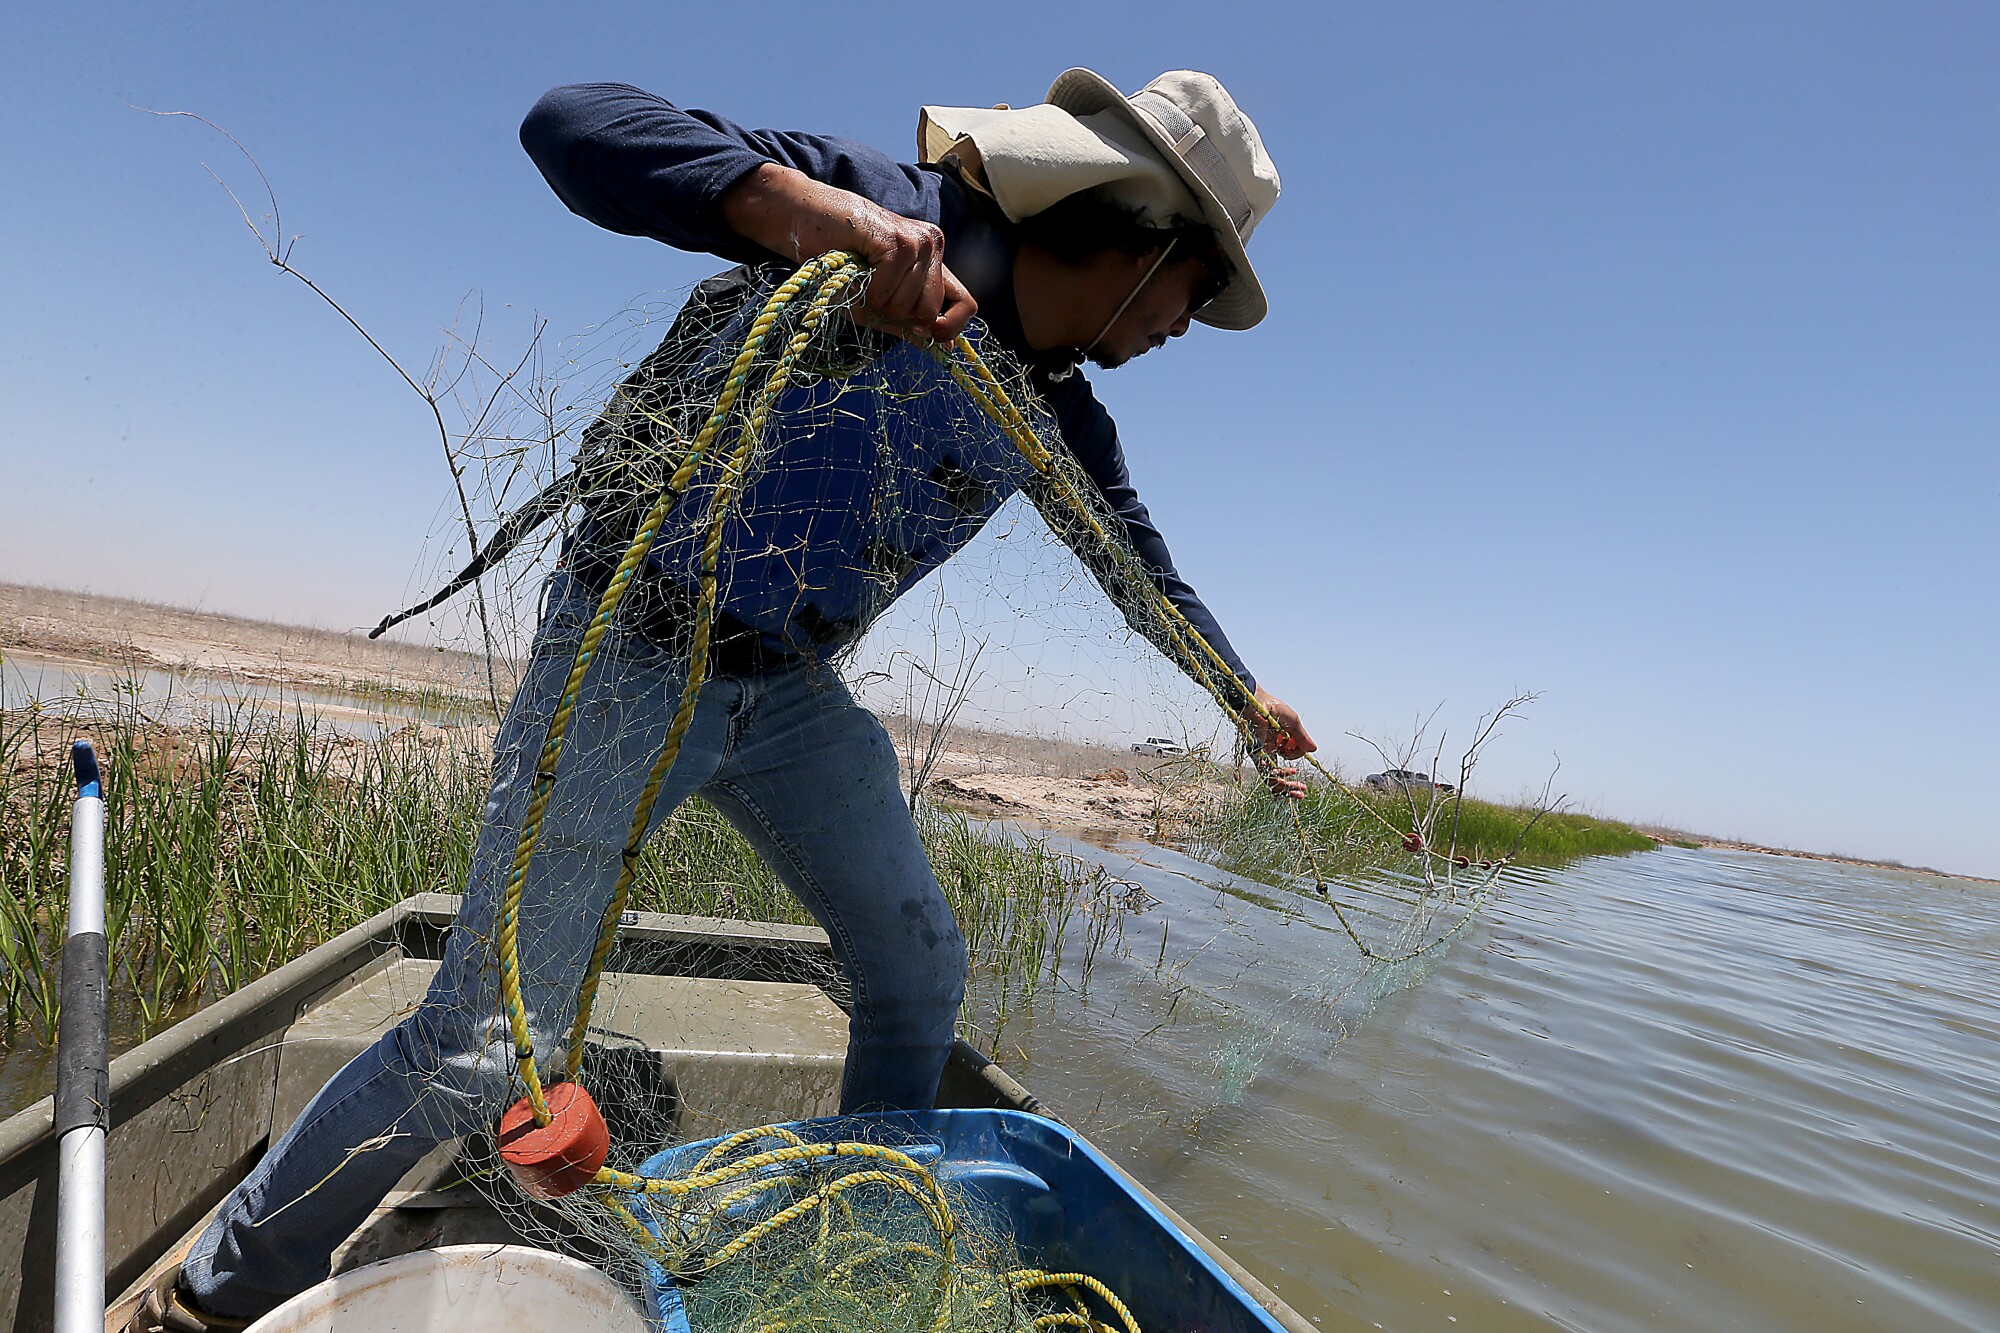 Conservationist Israel Mateo Sánchez Leyva uses a net while collecting fish